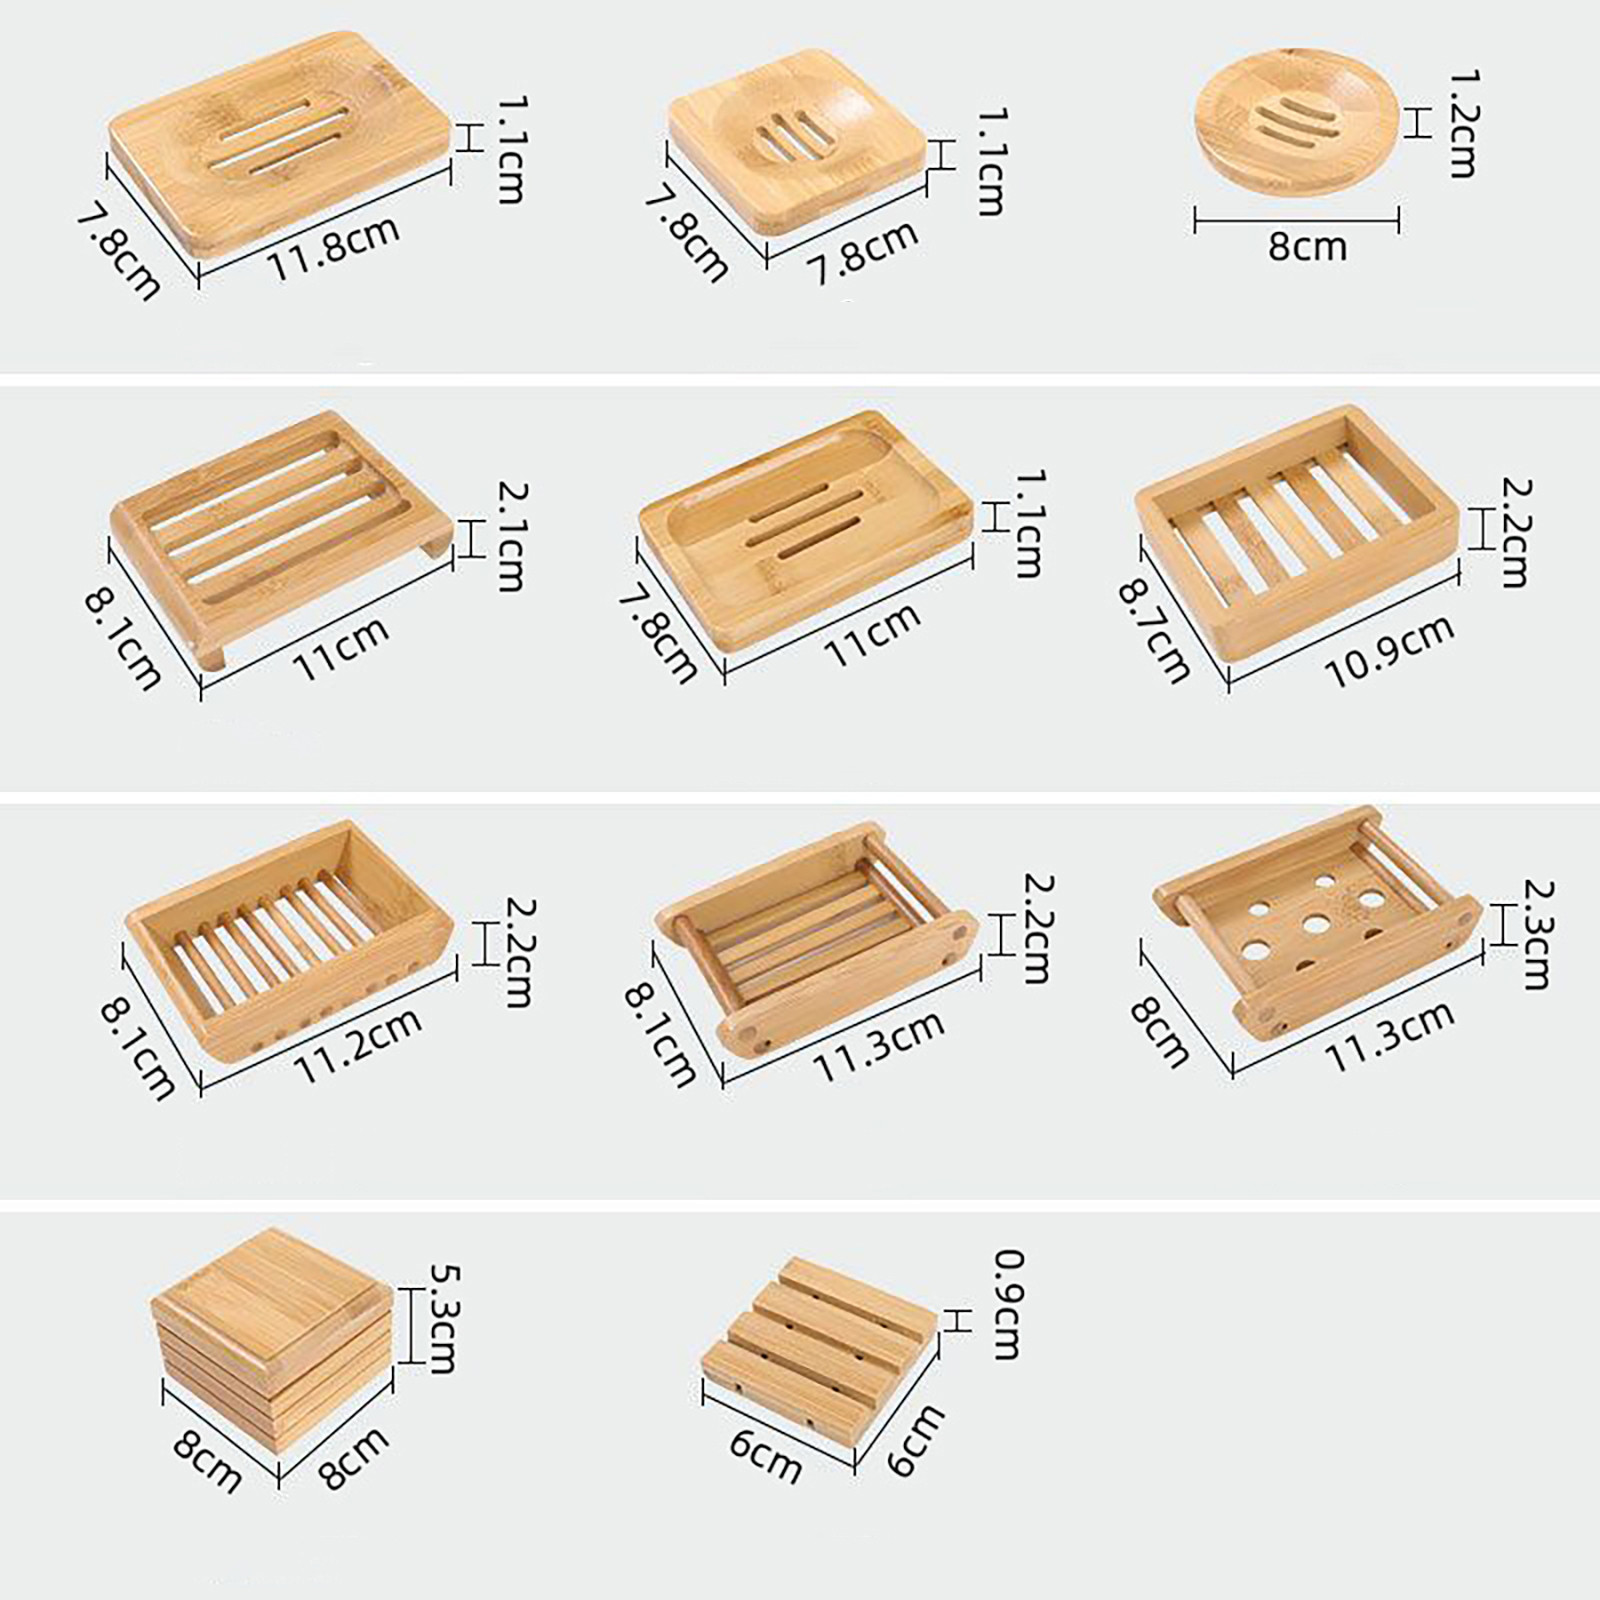 25# 1pc Natural Bamboo Soap Dish bamboo Wooden Soap Tray Holder Storage Soap Rack Plate Box Container for Bathroom